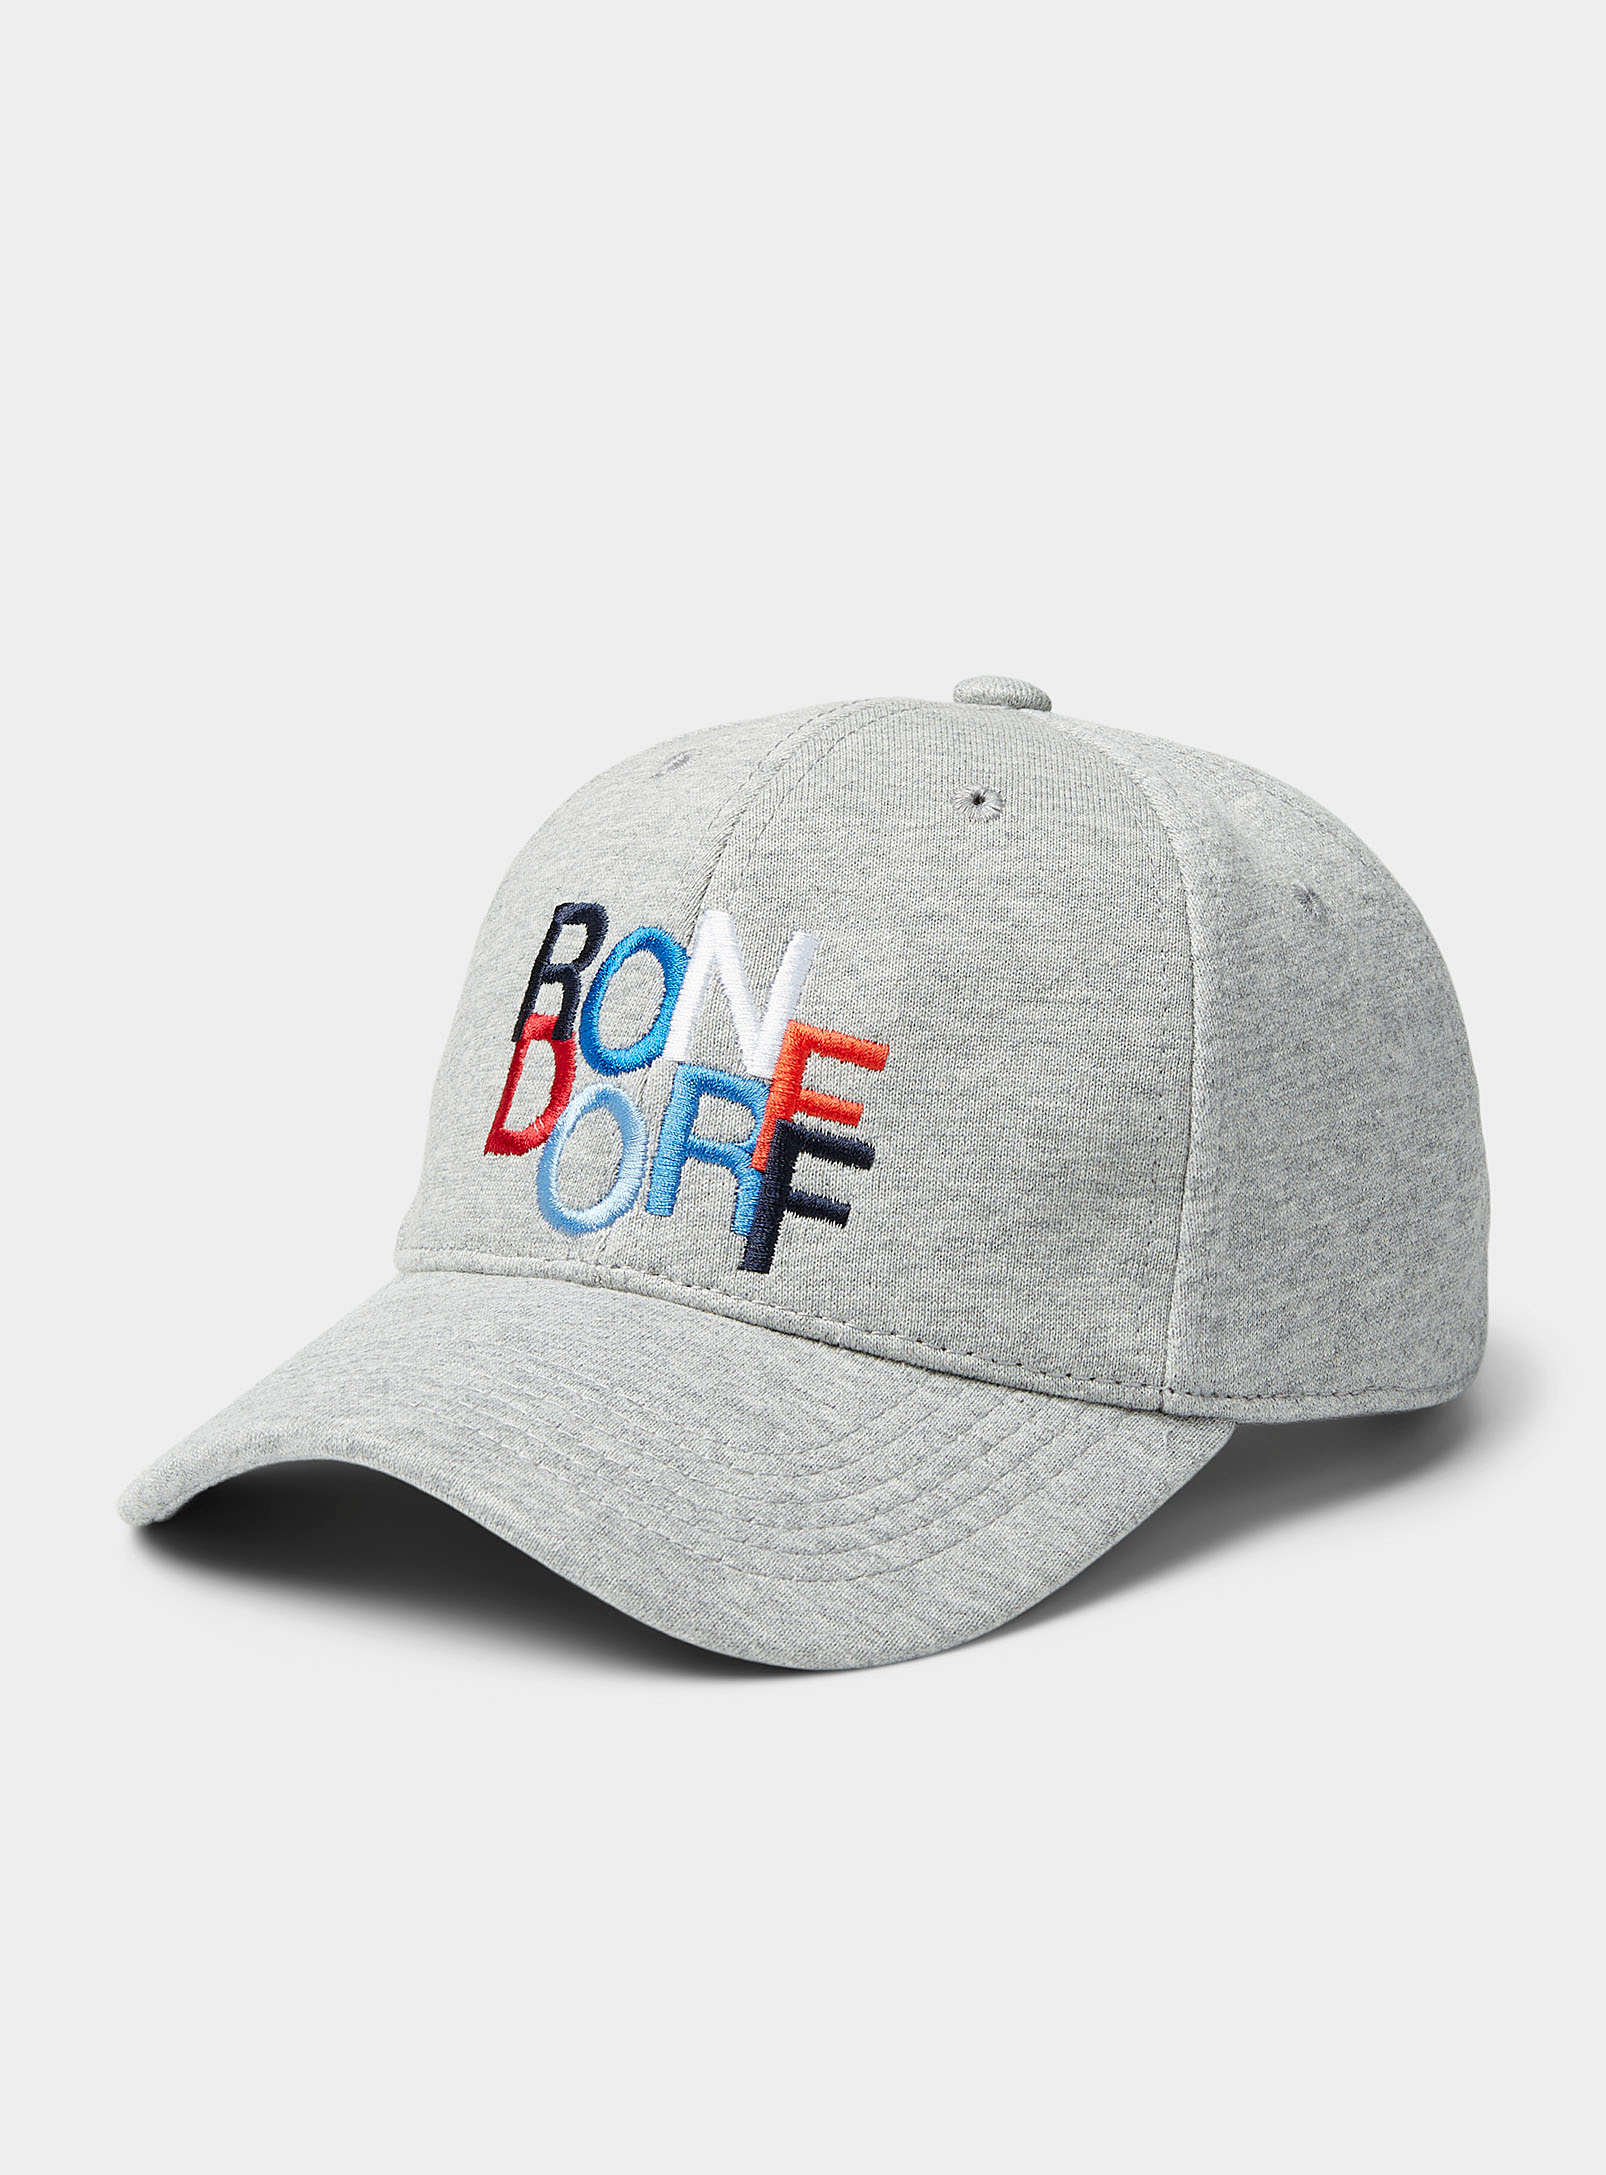 Ron Dorff Embroidered Signature Jersey Cap In Gray